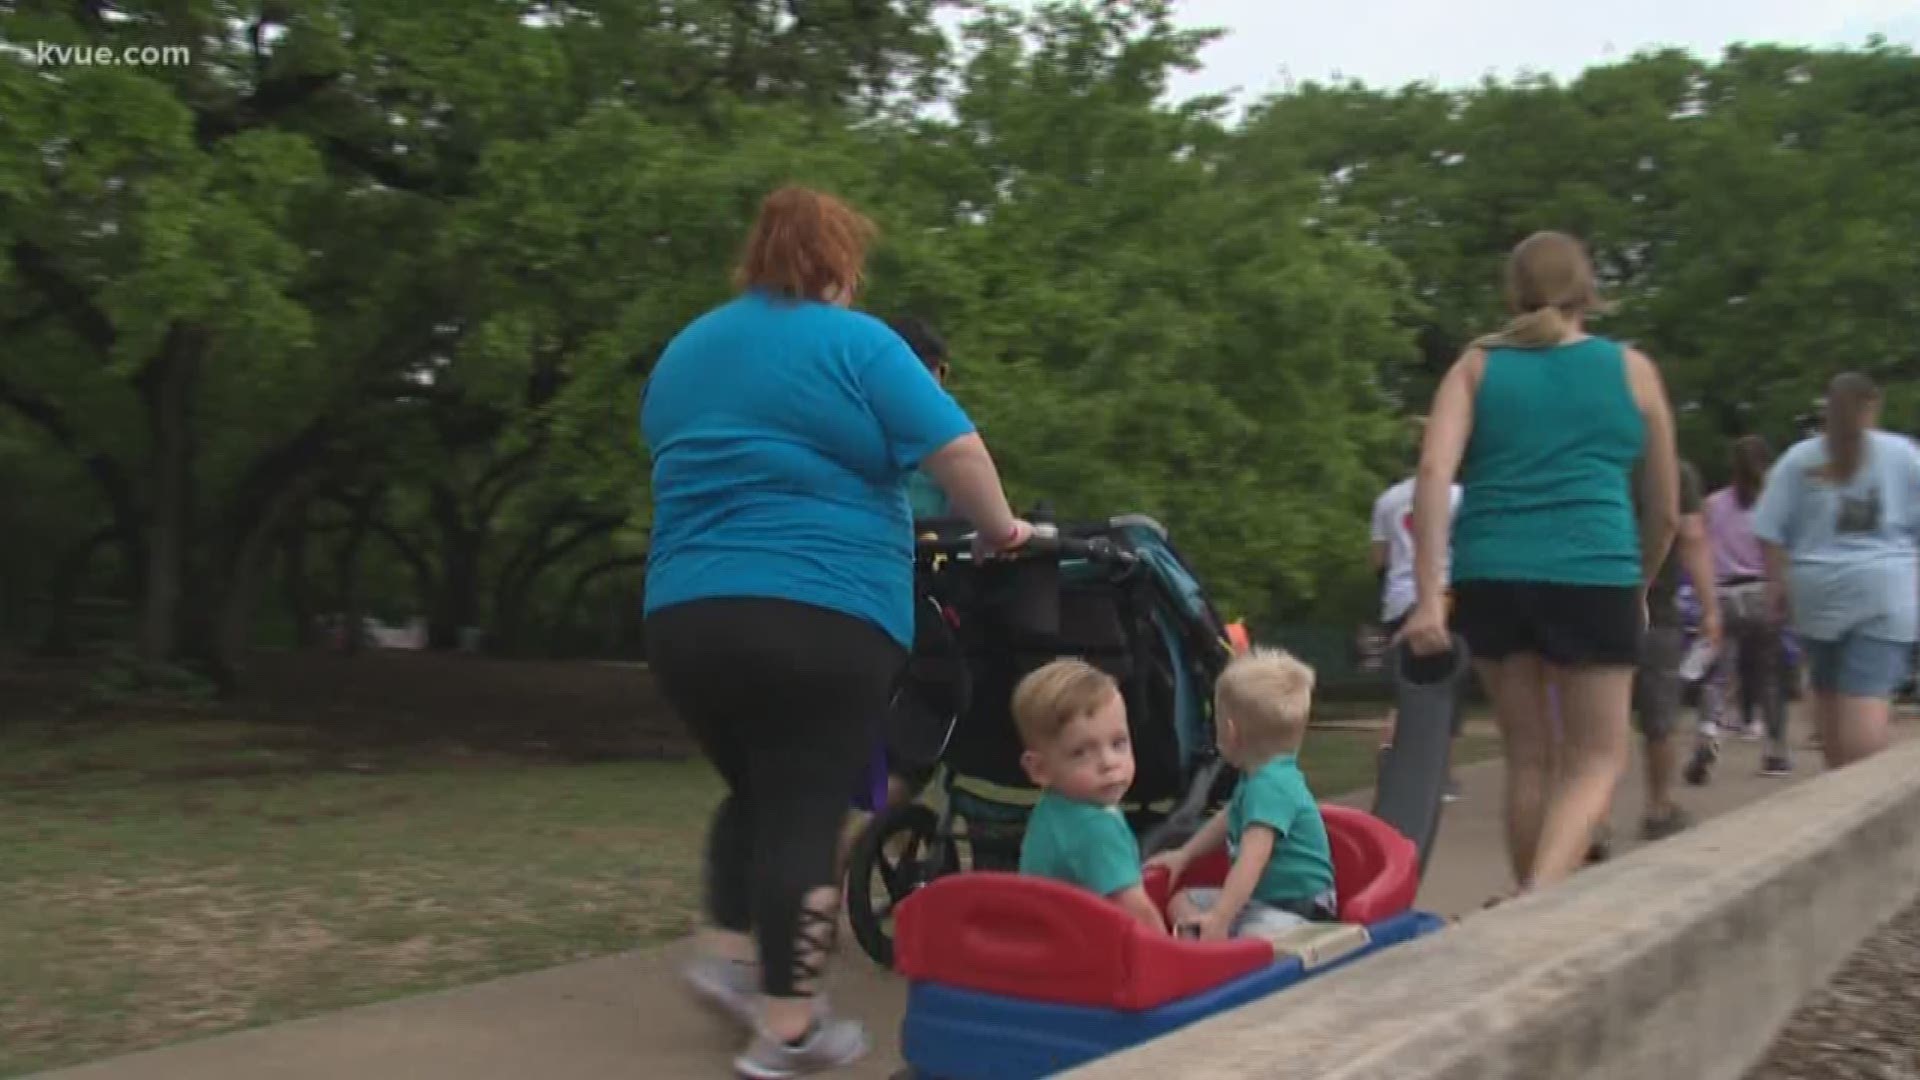 An Austin mother nearly lost her life after complications during pregnancy and childbirth.